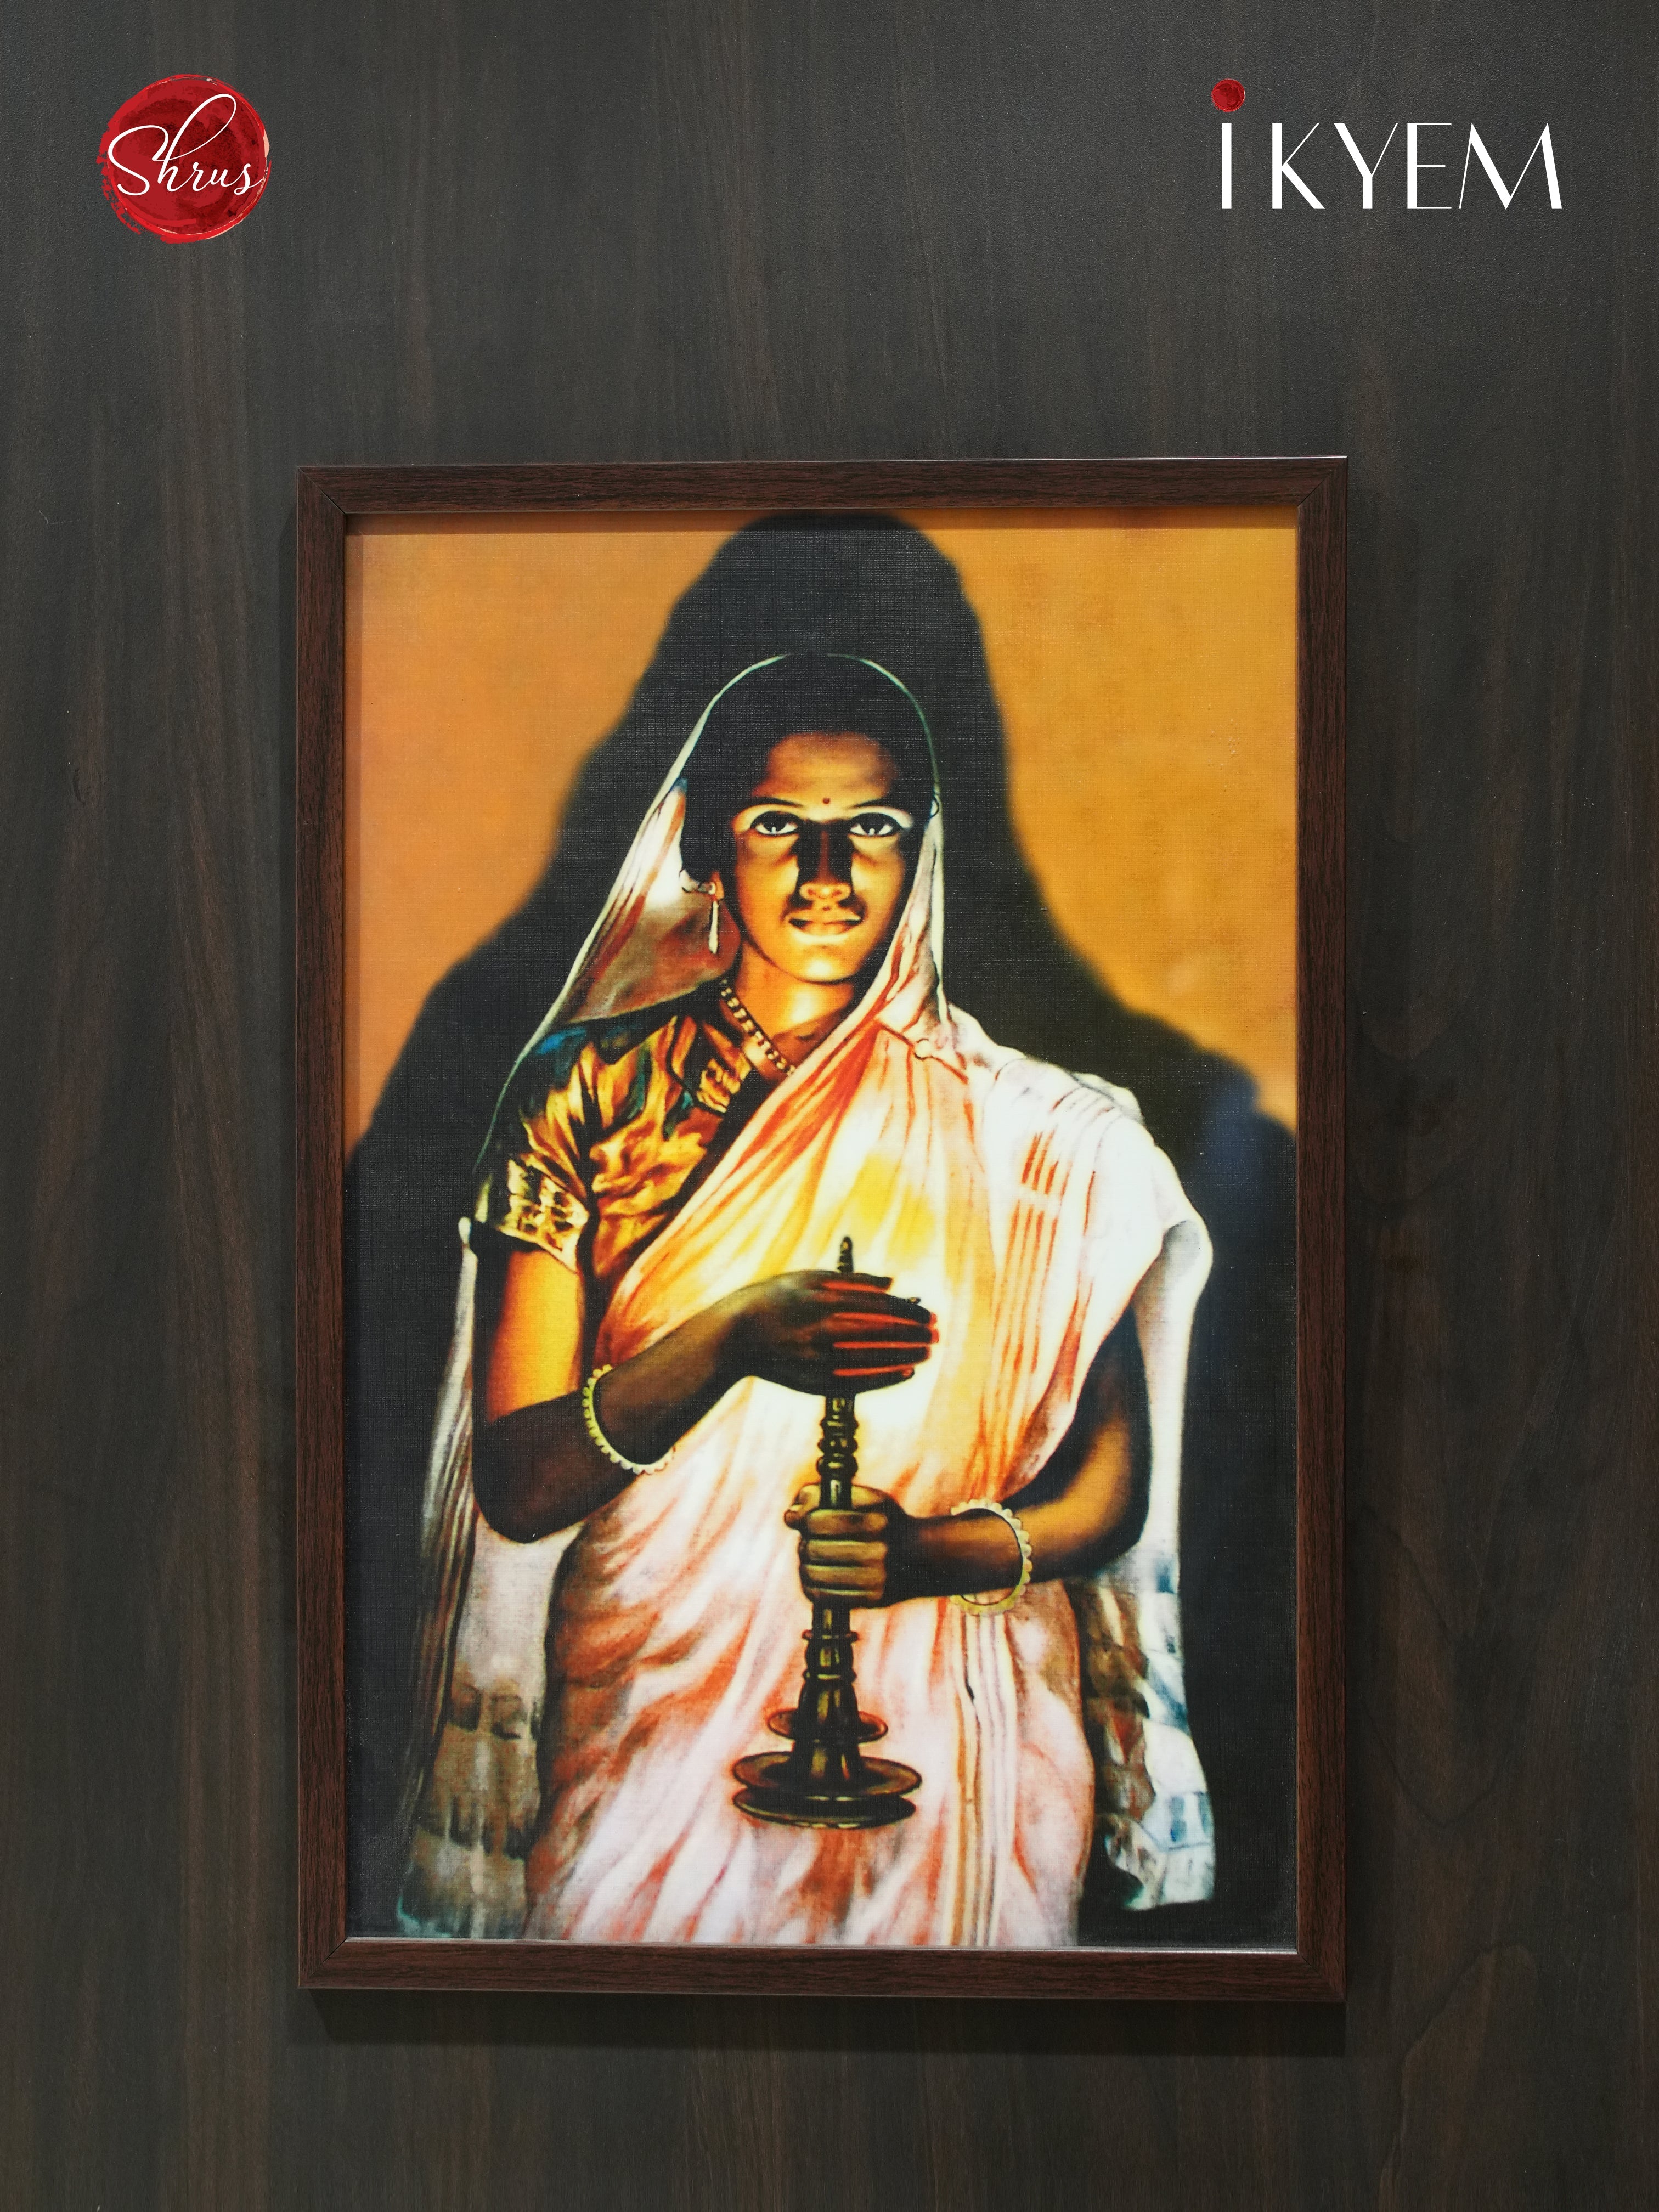 The Lady with a Lamp - A Digital representation of a Classic Ravi Varma Painting